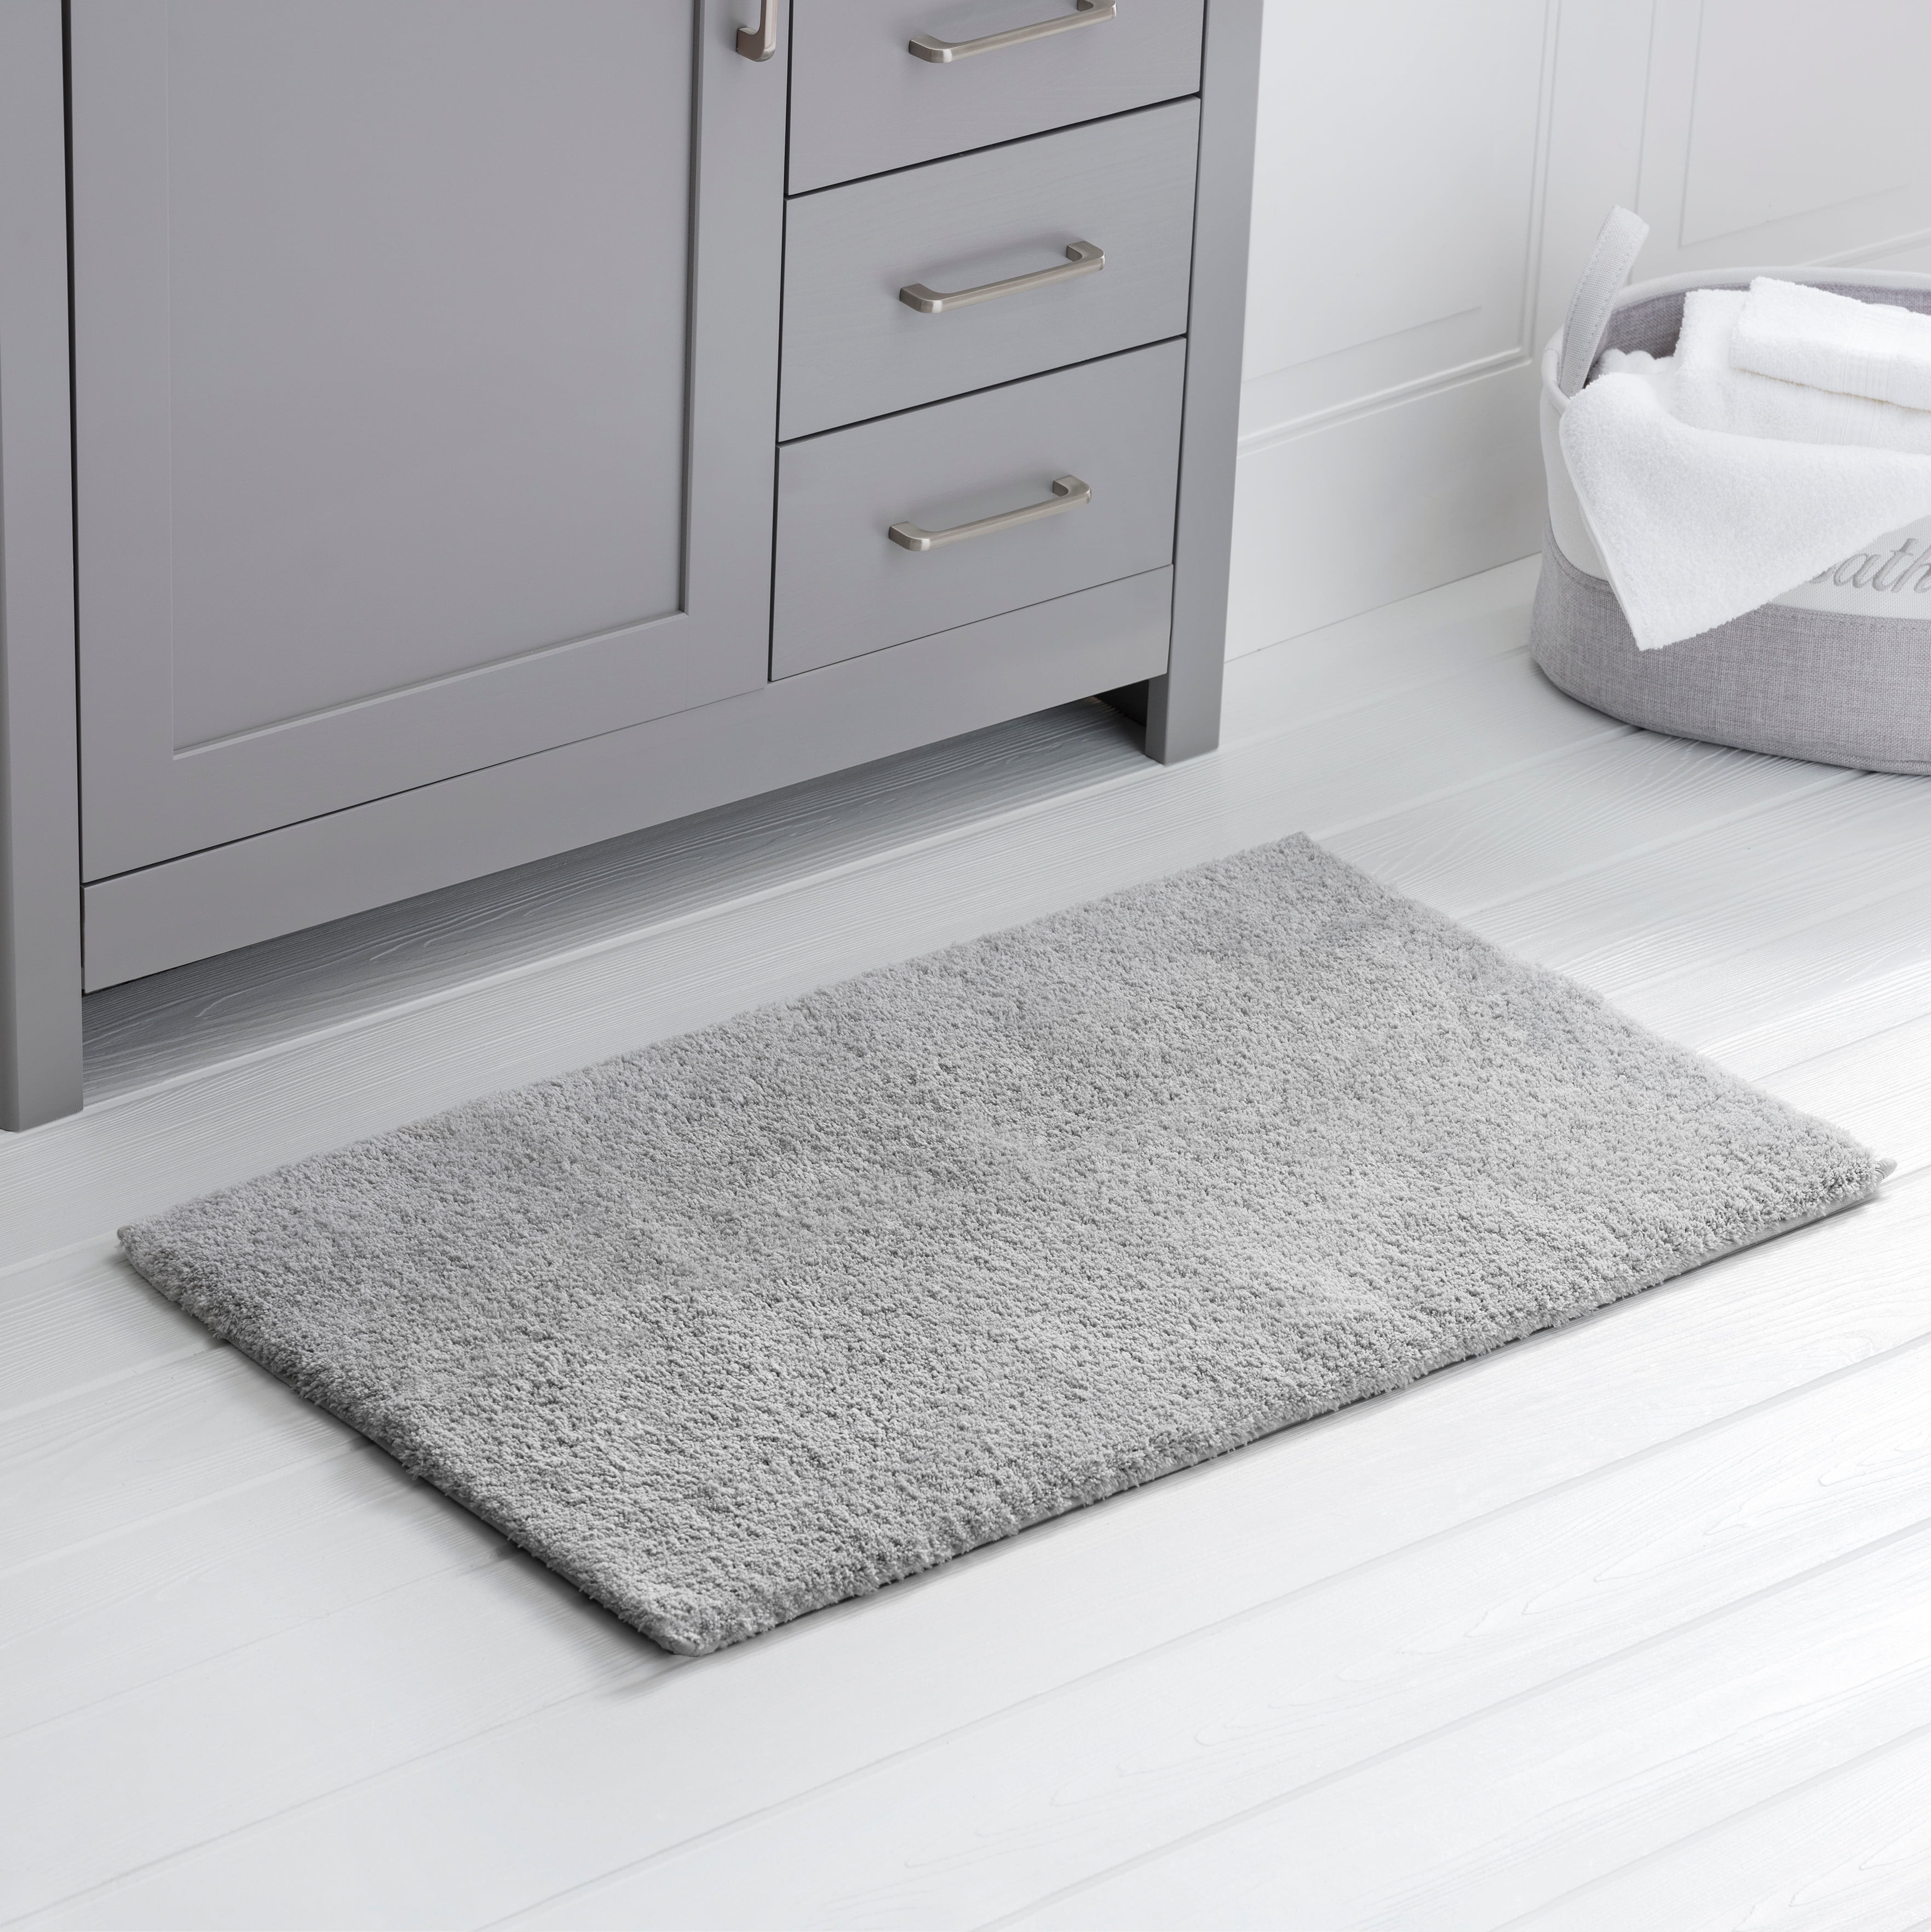 Better Homes and Gardens Thick and Plush Bath Rug, 20 x 34, Soft Silver